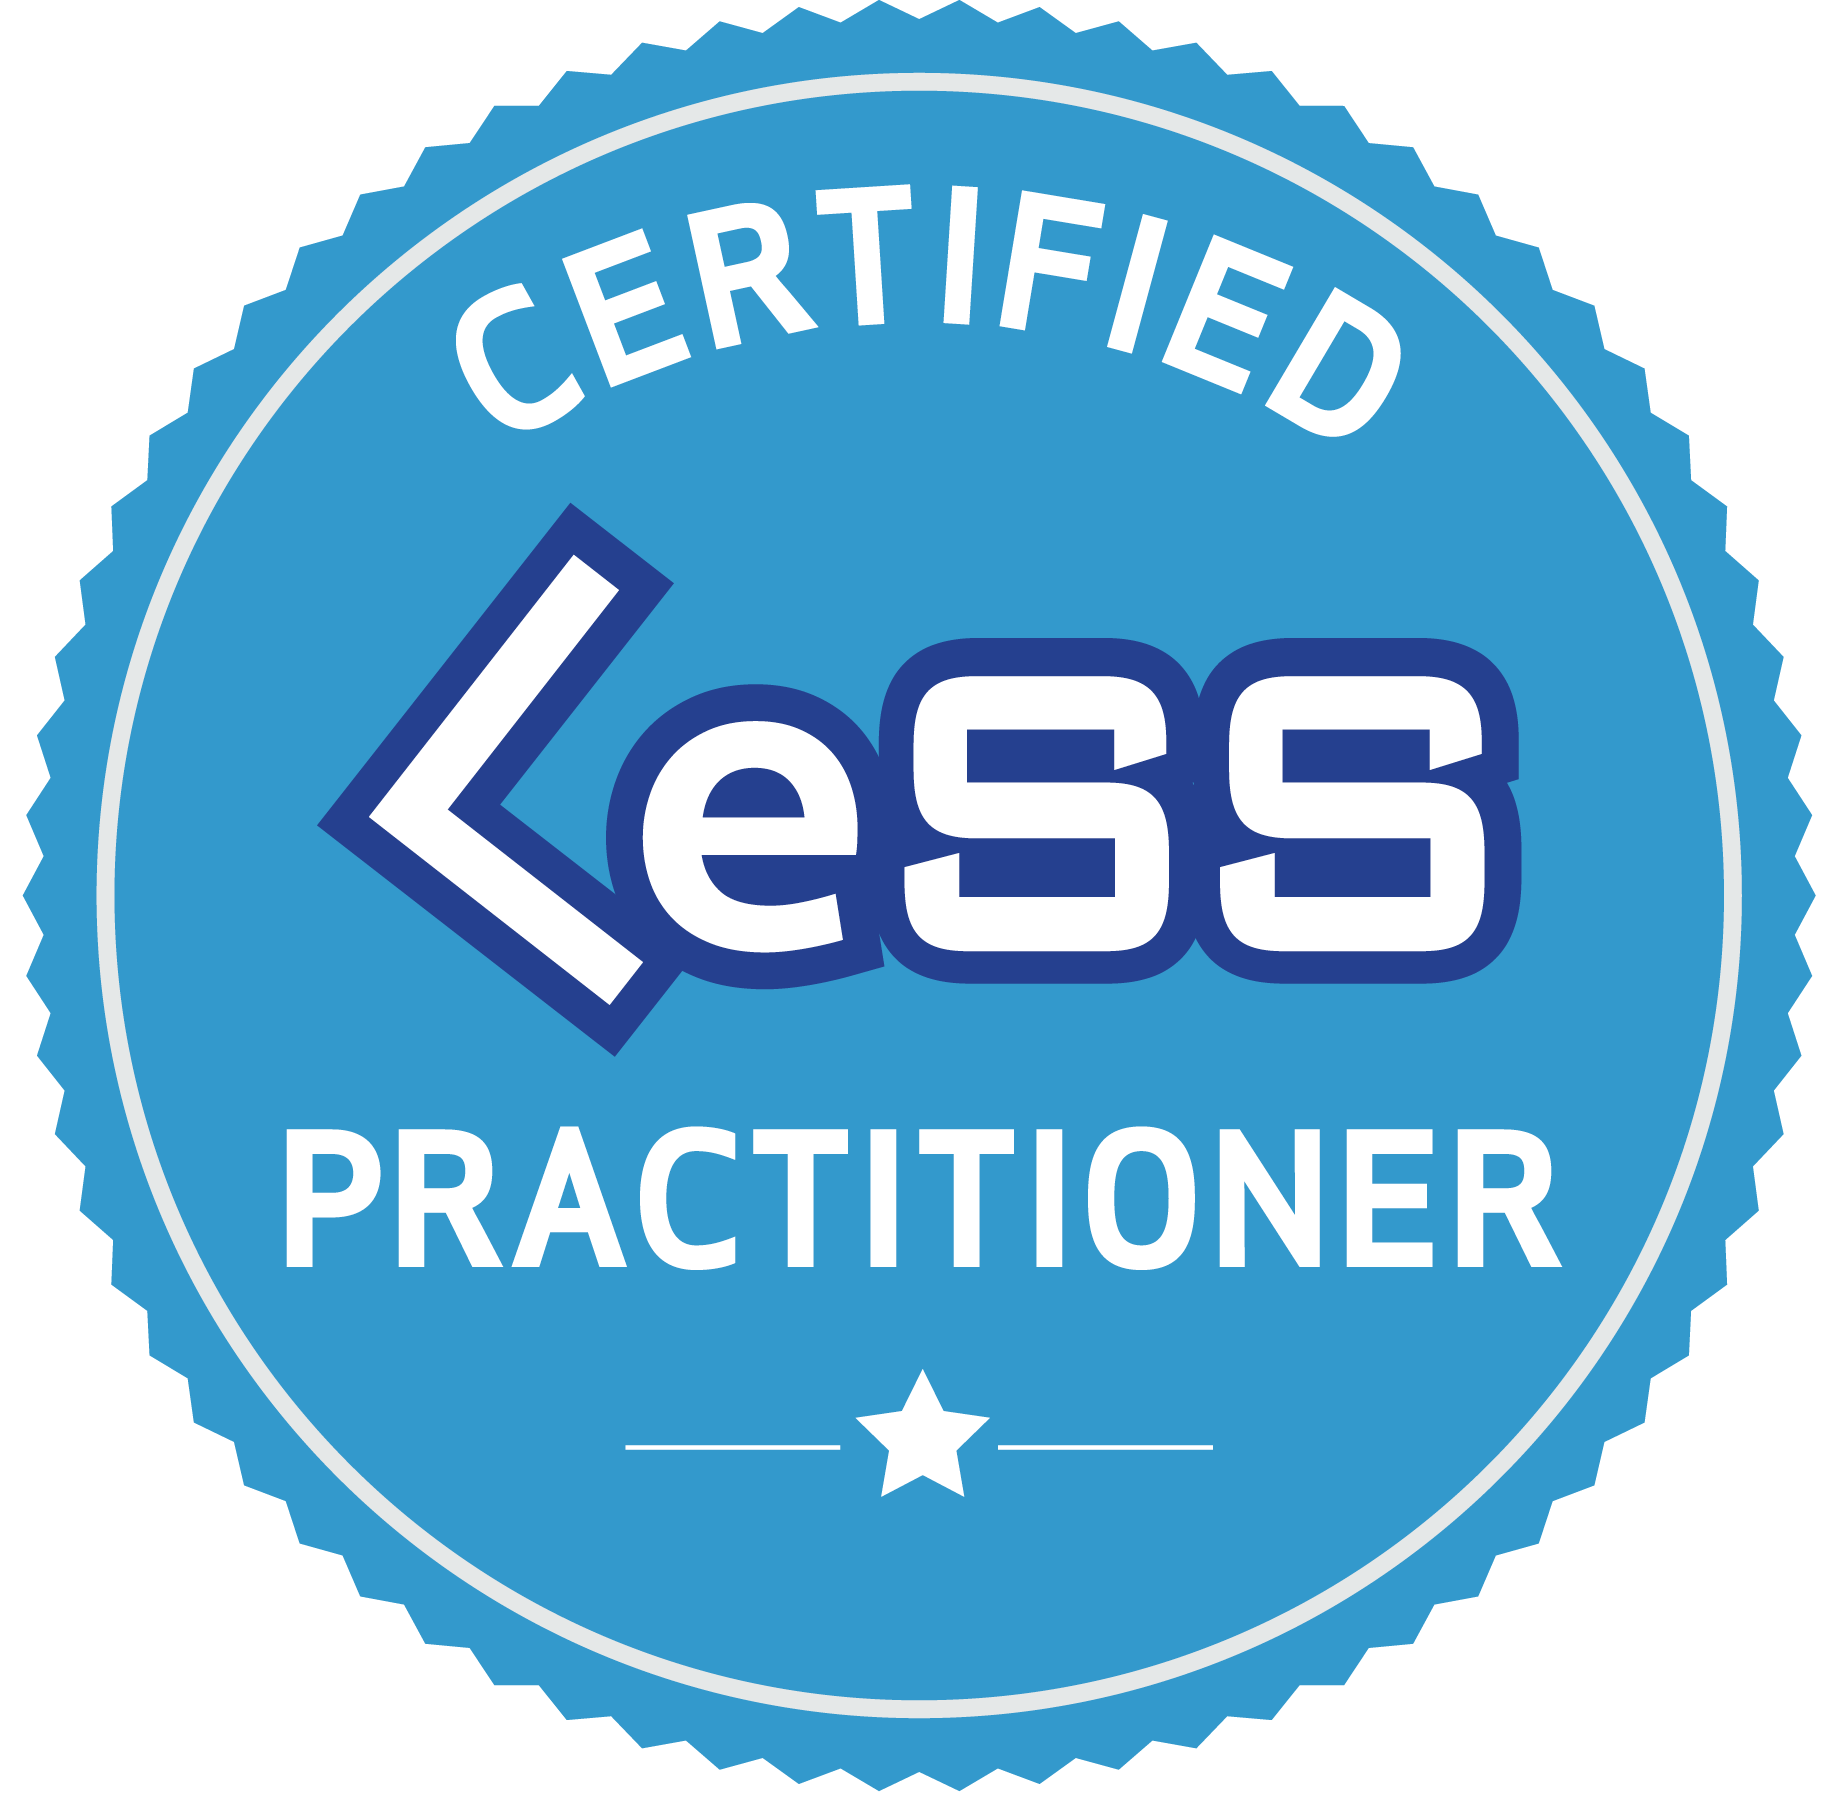 Certified LeSS Practitioner - Principles to Practices